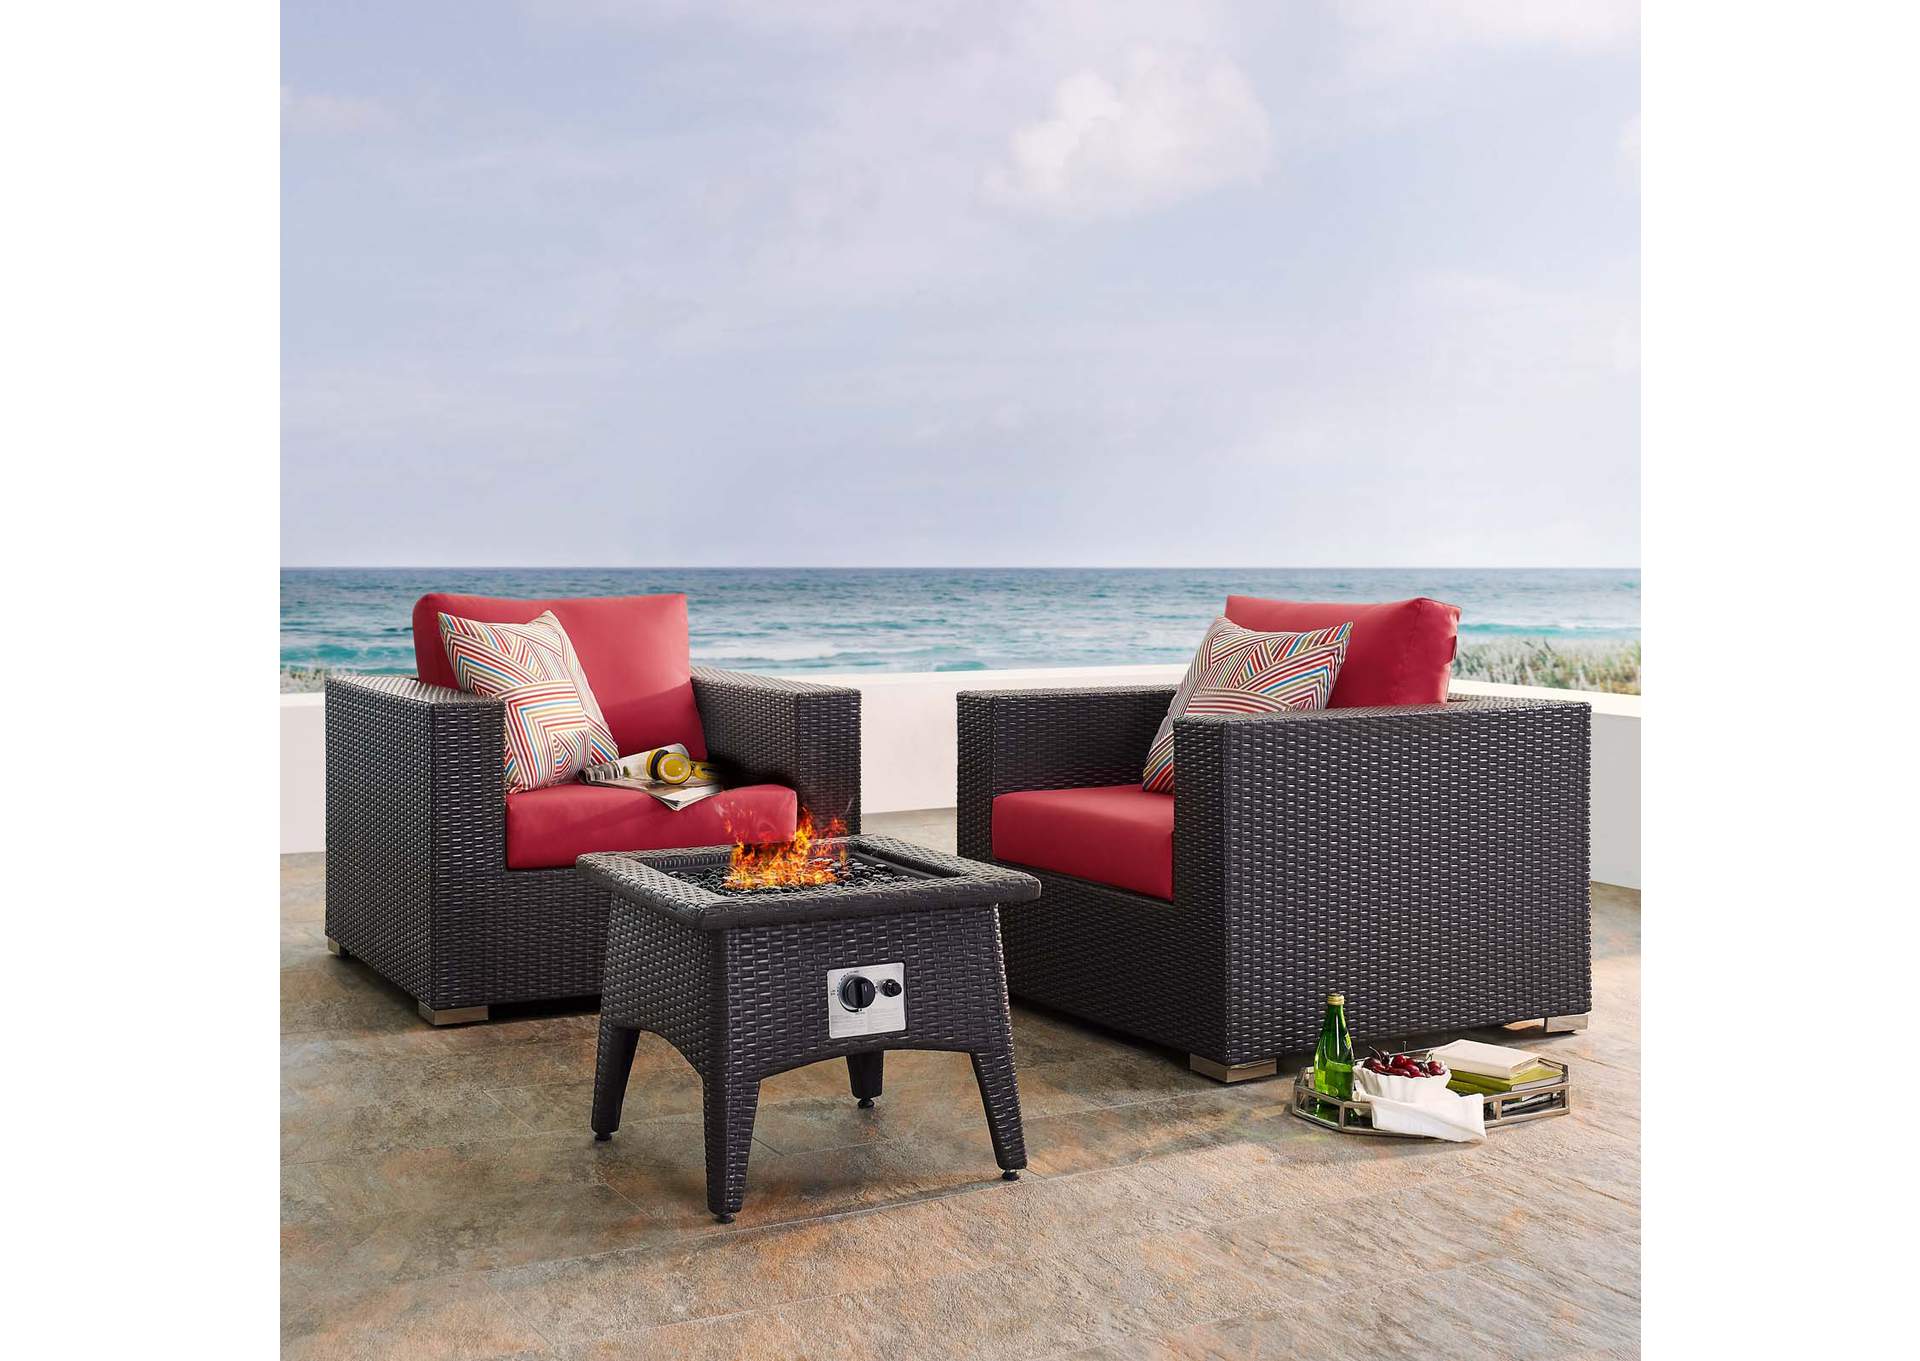 Espresso Red Convene 3 Piece Set Outdoor Patio with Fire Pit,Modway